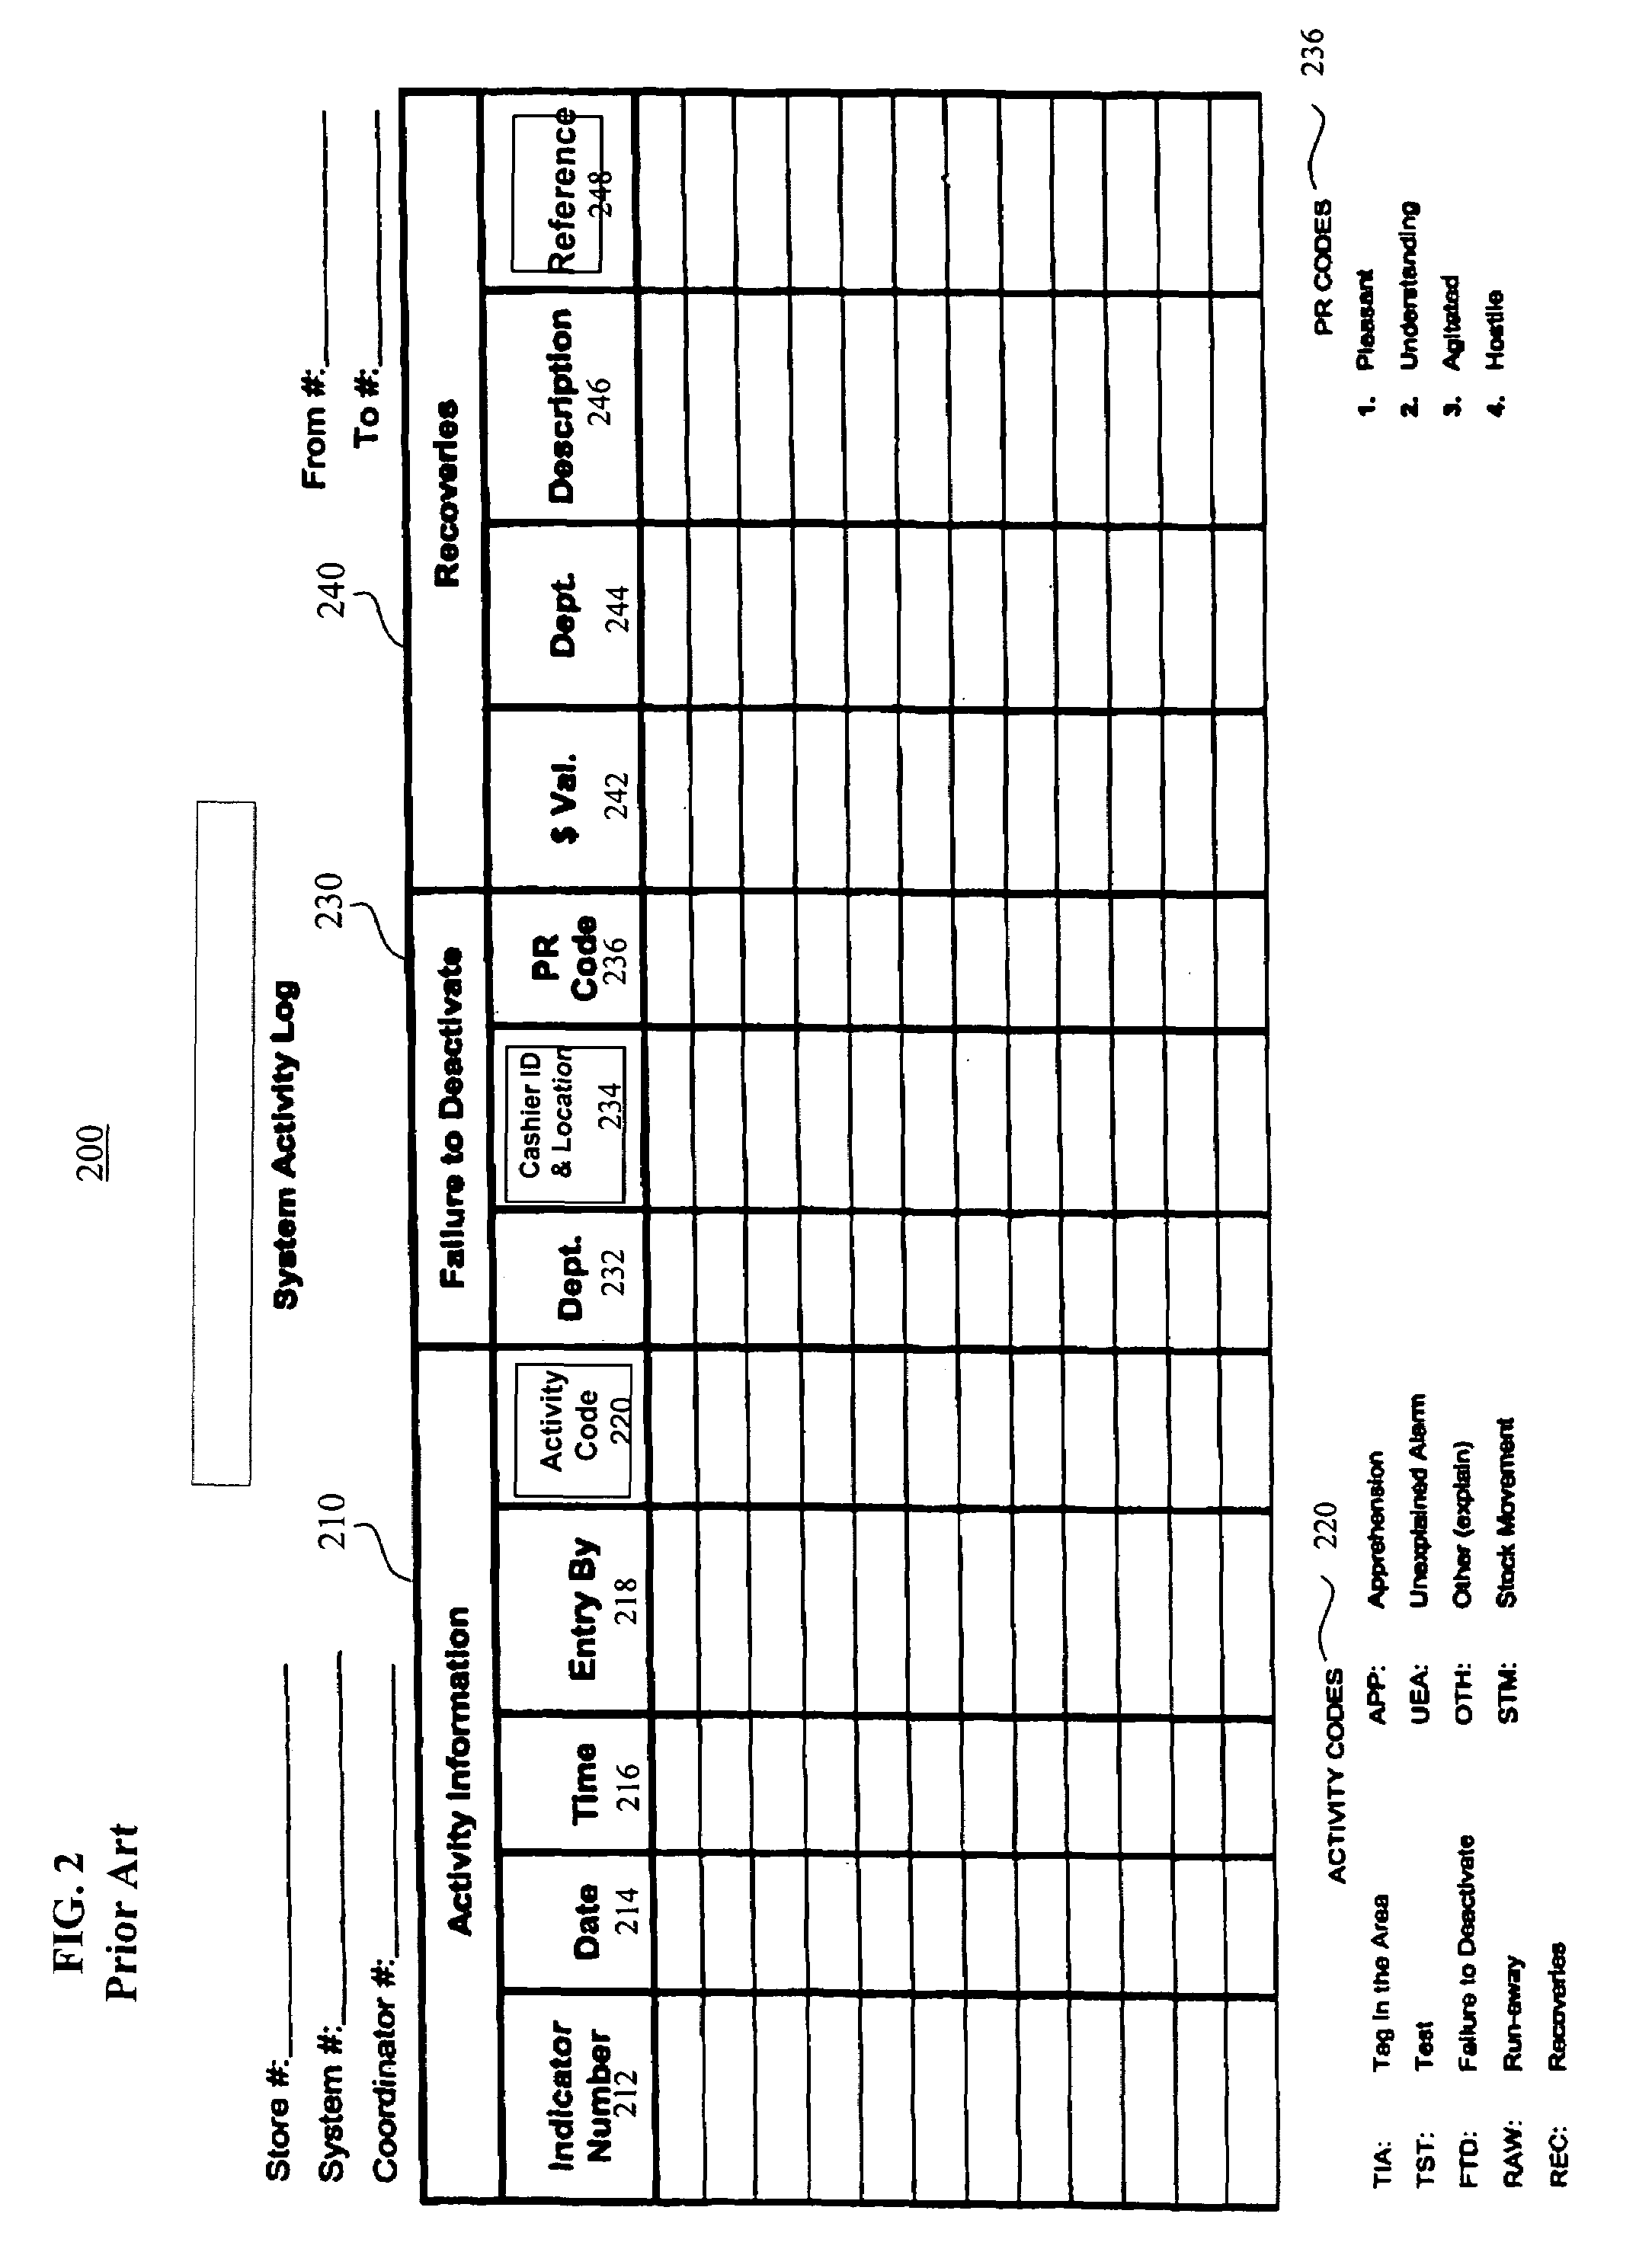 Integrated electronic article surveillance (EAS) and point of sale (POS) system and method